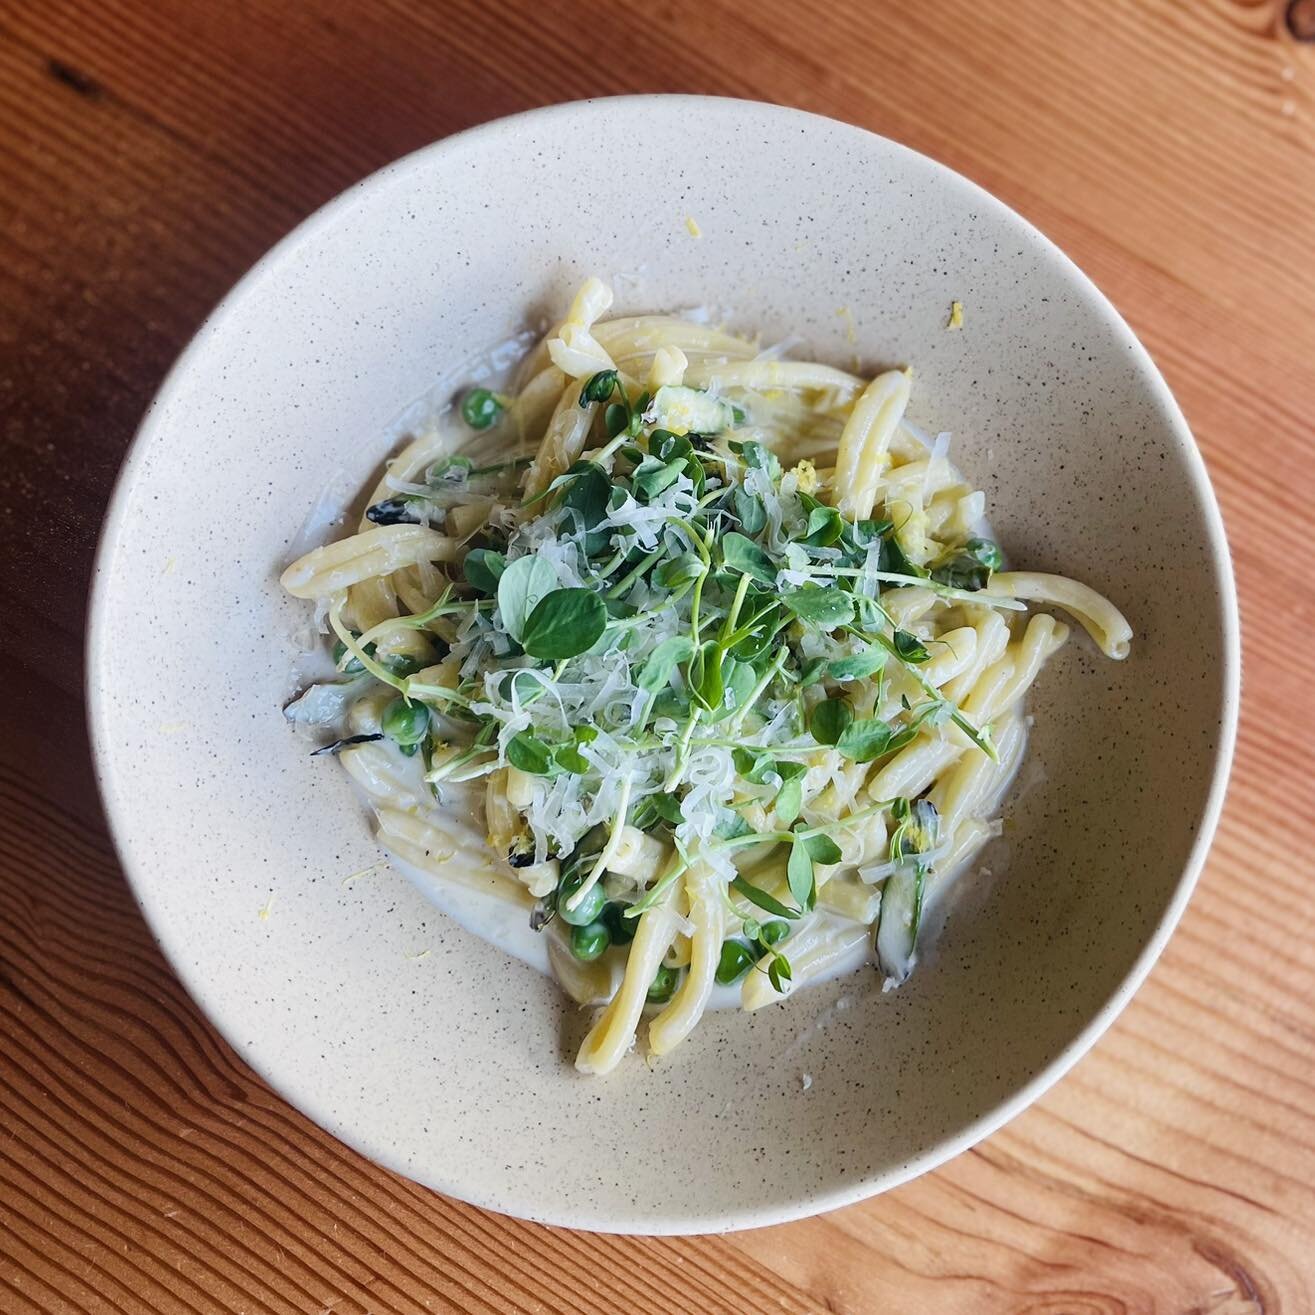 Don&rsquo;t miss your chance to try our spring pasta special, available for a few more days before our culinary team implements the next round of seasonal specials&hellip;

Casarecce pasta, charred asparagus, spring peas, 
pea shoots, lemon, shallots